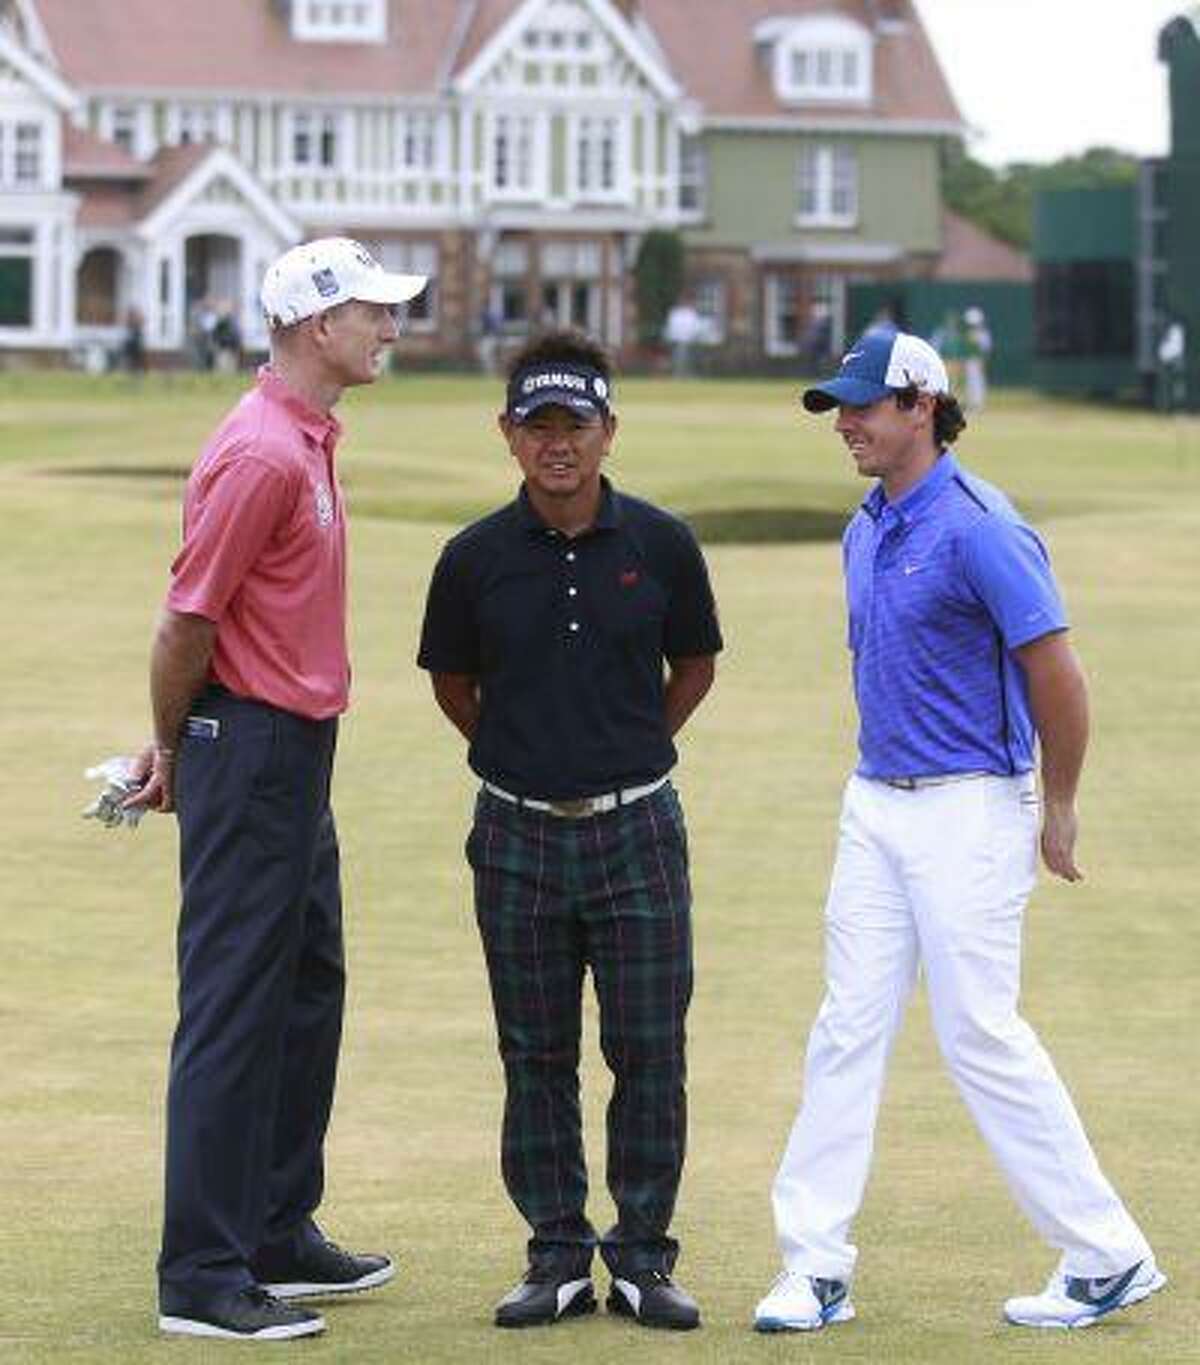 Jim Furyk of the United States, left, Hiroyuki Fujita of Japan, center, and Rory McIlroy of Northern Ireland pose for a photo in front of the club house after a practice round ahead of the British Open Golf Championship at Muirfield, Scotland, Wednesday July 17, 2013.